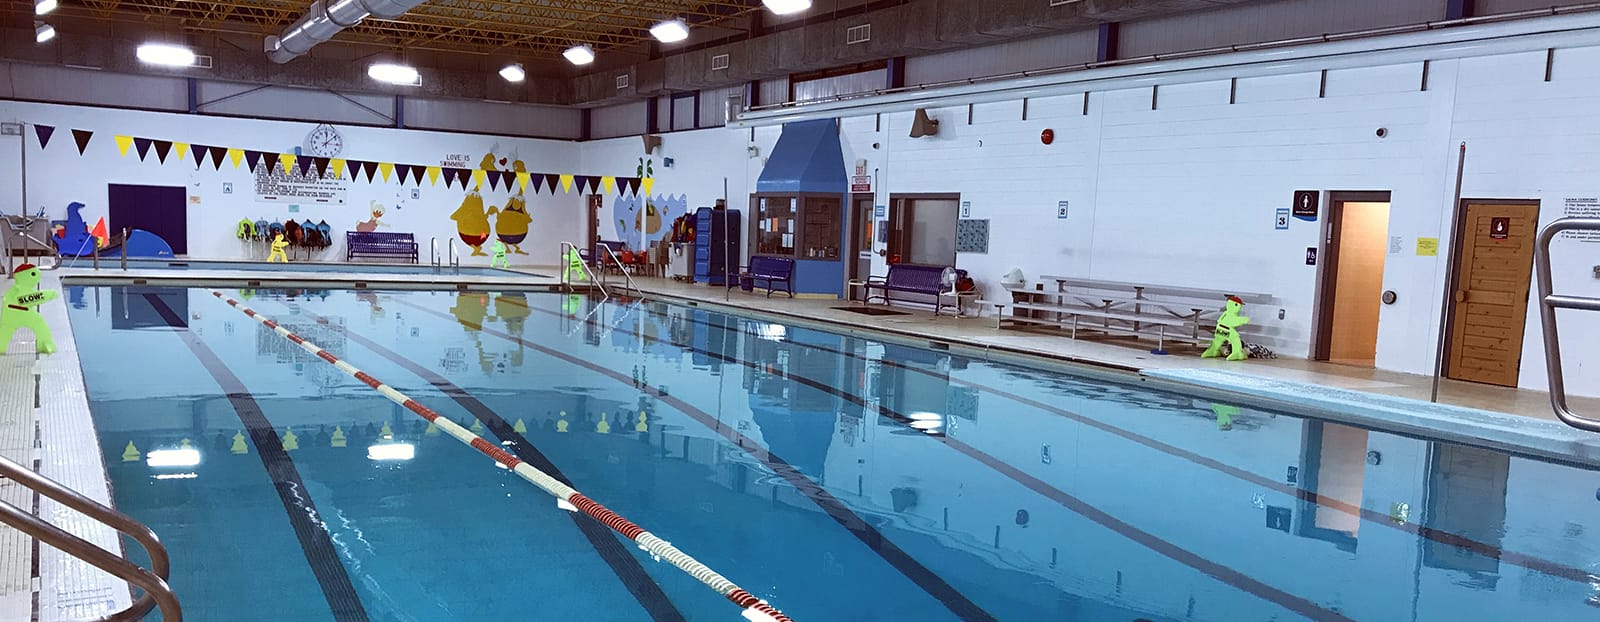 The interior of Churchill Pool in Thunder Bay; a large indoor swimming pool with lanes and toys.